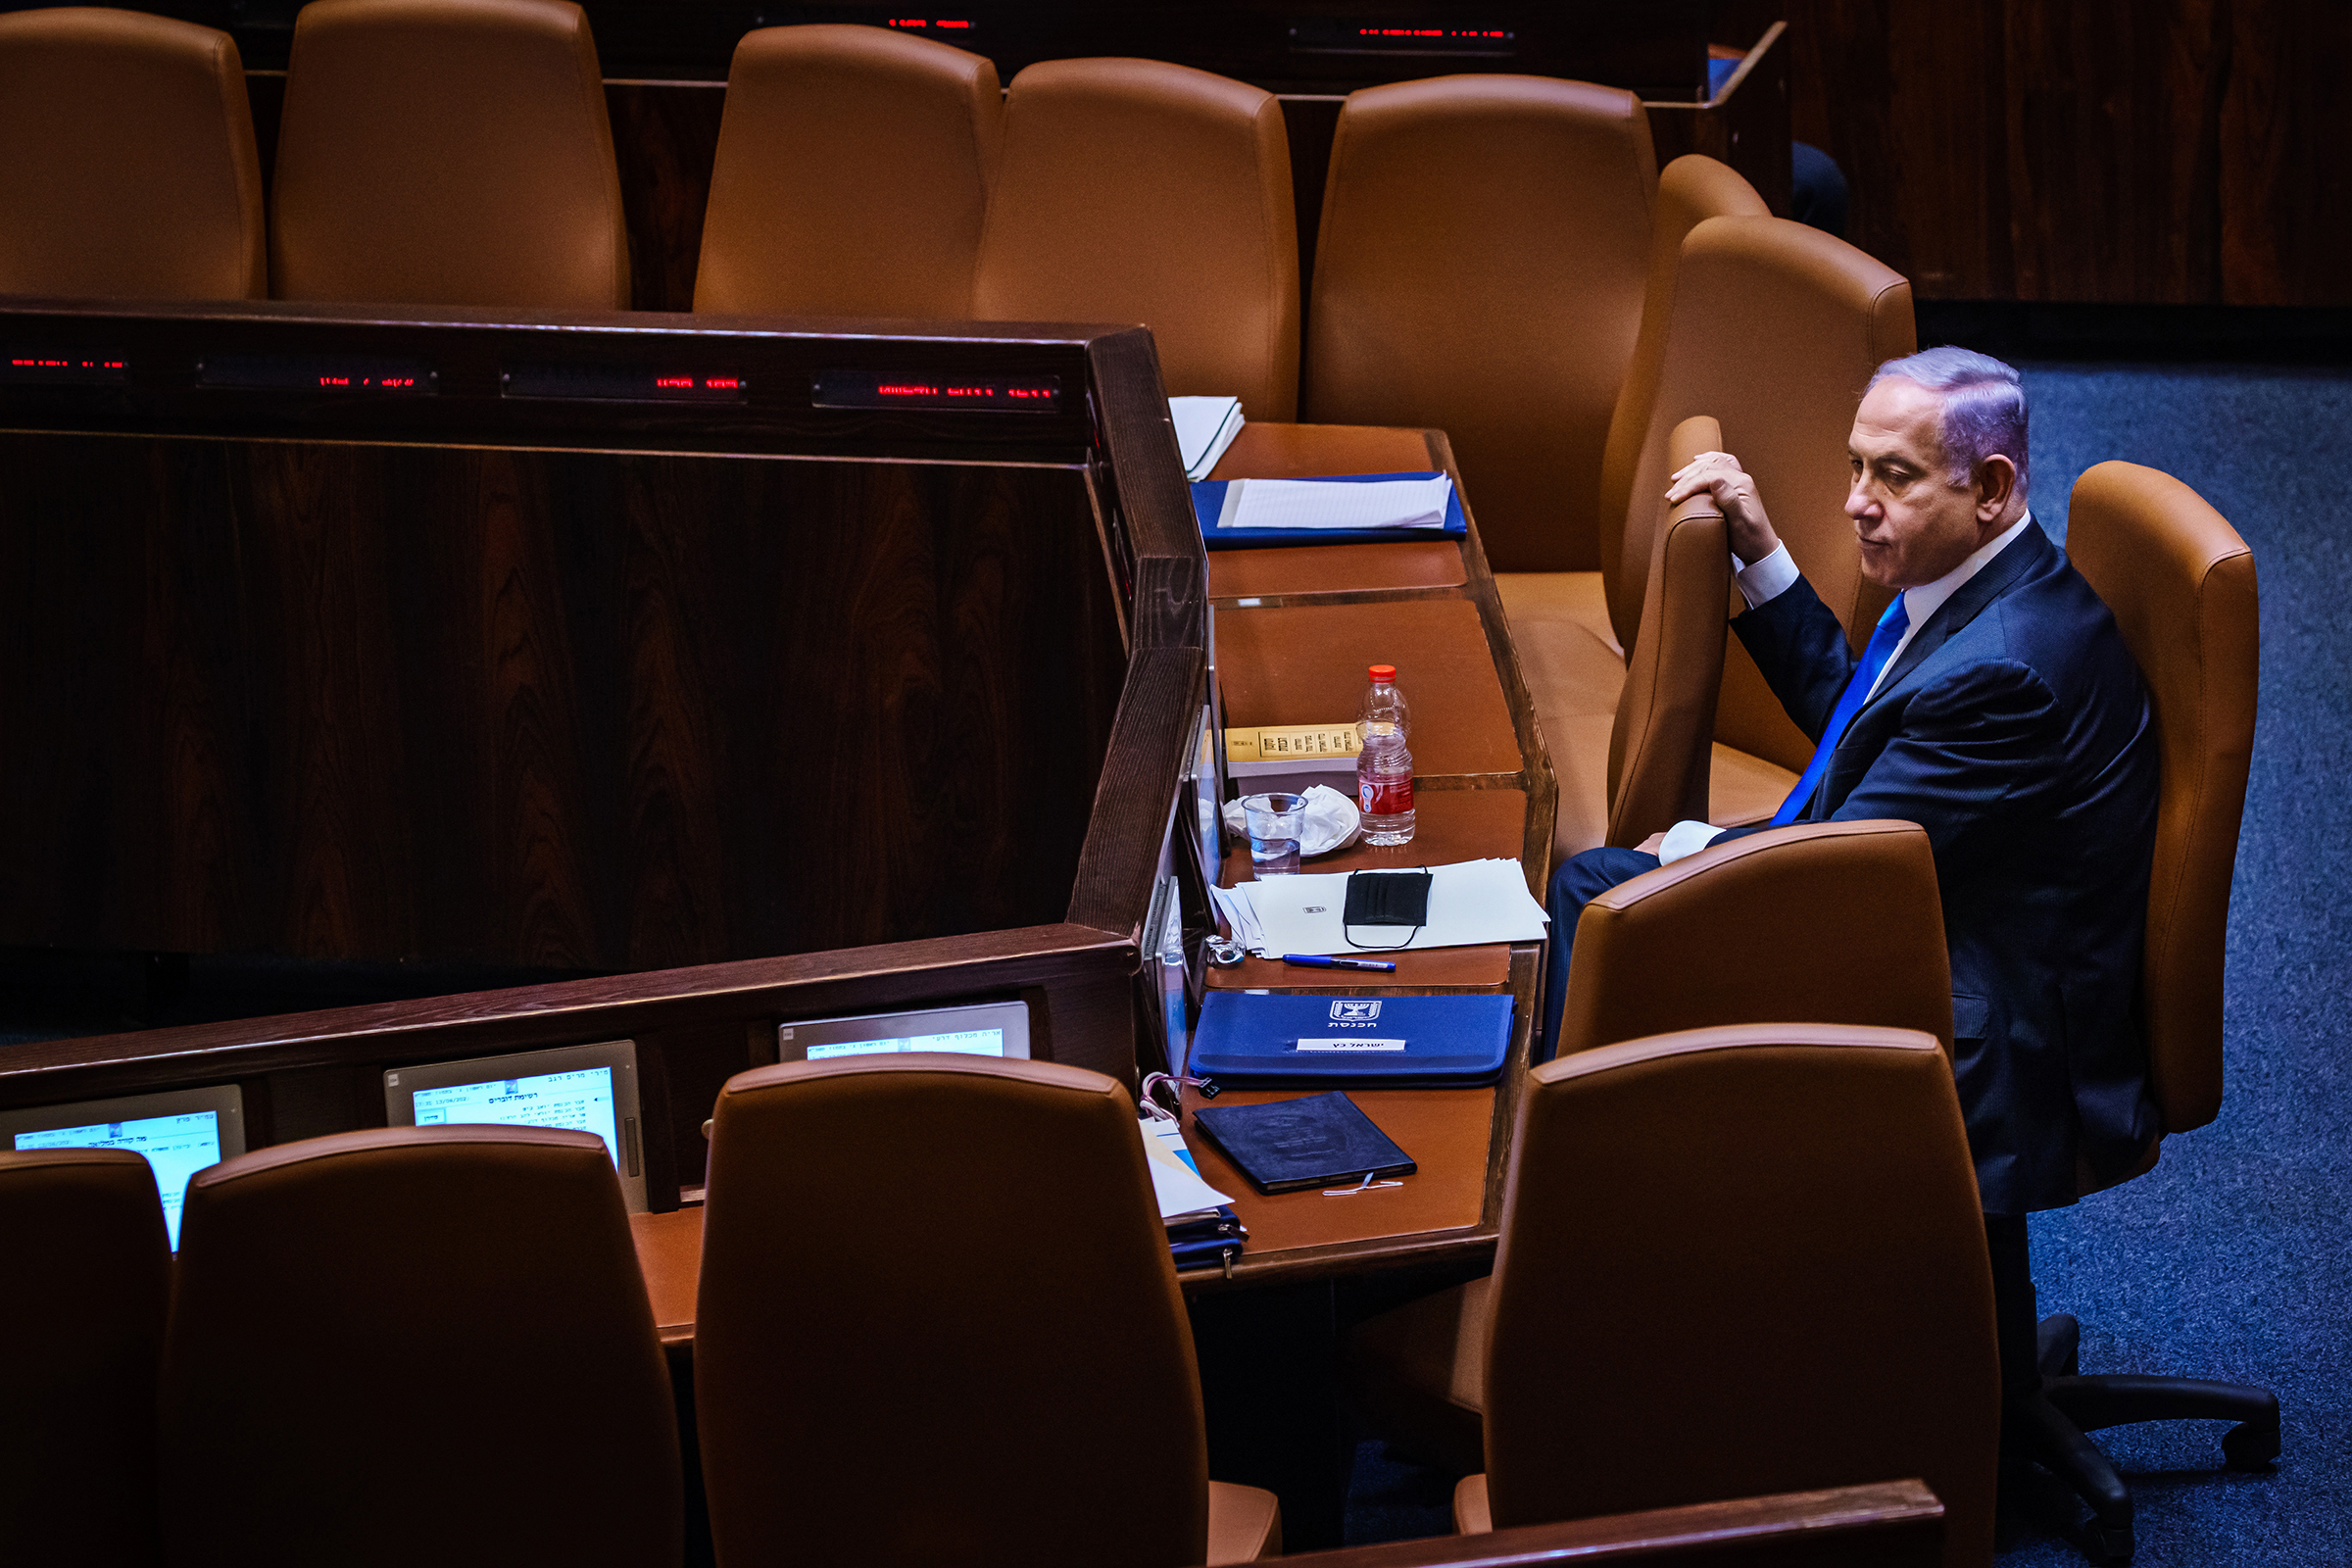 Benjamin Netanyahu takes a look at the empty seats as members of the Knesset, Israel's Parliament, step out for a break in Jerusalem on June 13, before returning to cast their vote of confidence to empower the new coalition government and unseat him as the country's longest-serving prime minister. (Marcus Yam—Los Angeles Times/Getty Images)